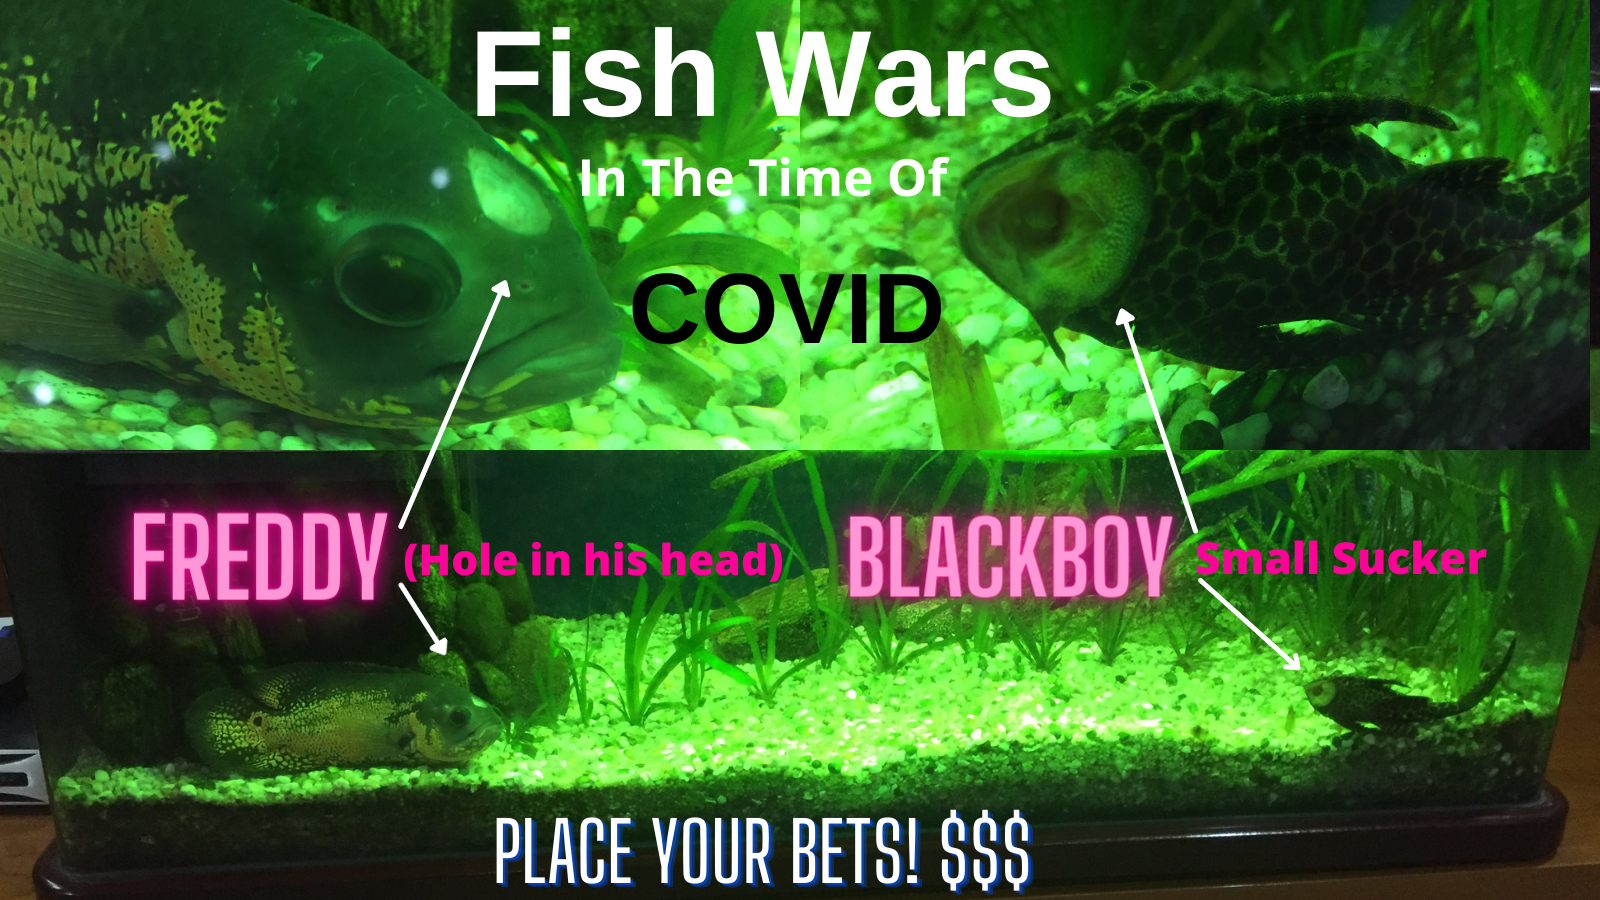 Fish Wars in the time of COVID19 – Who will win? – Place Your Bets!